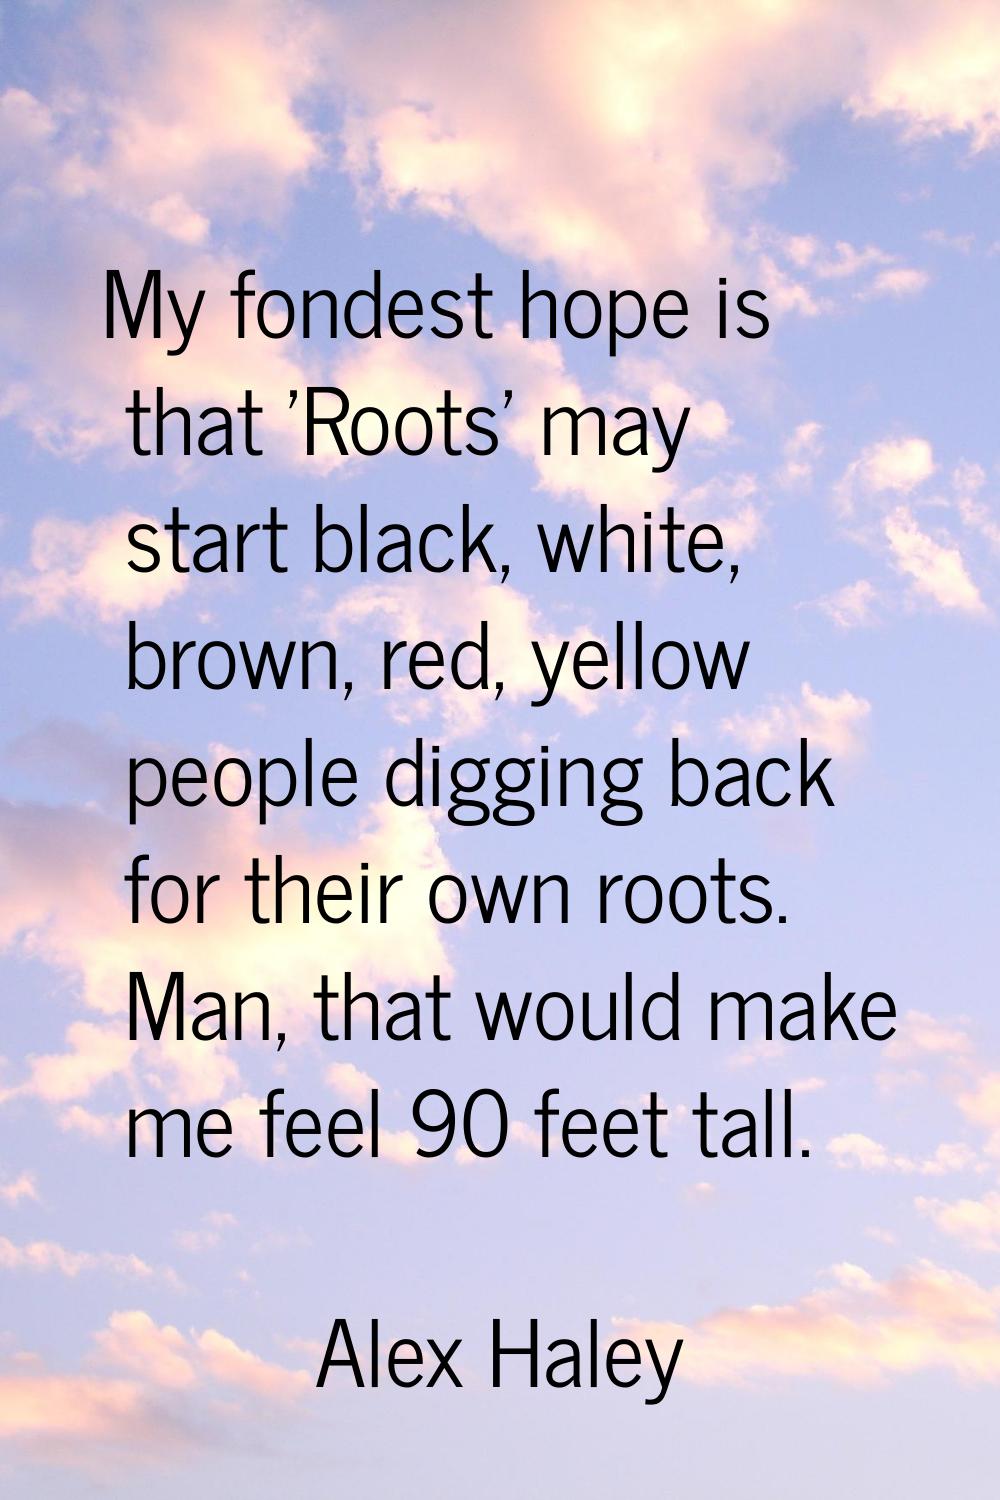 My fondest hope is that 'Roots' may start black, white, brown, red, yellow people digging back for 